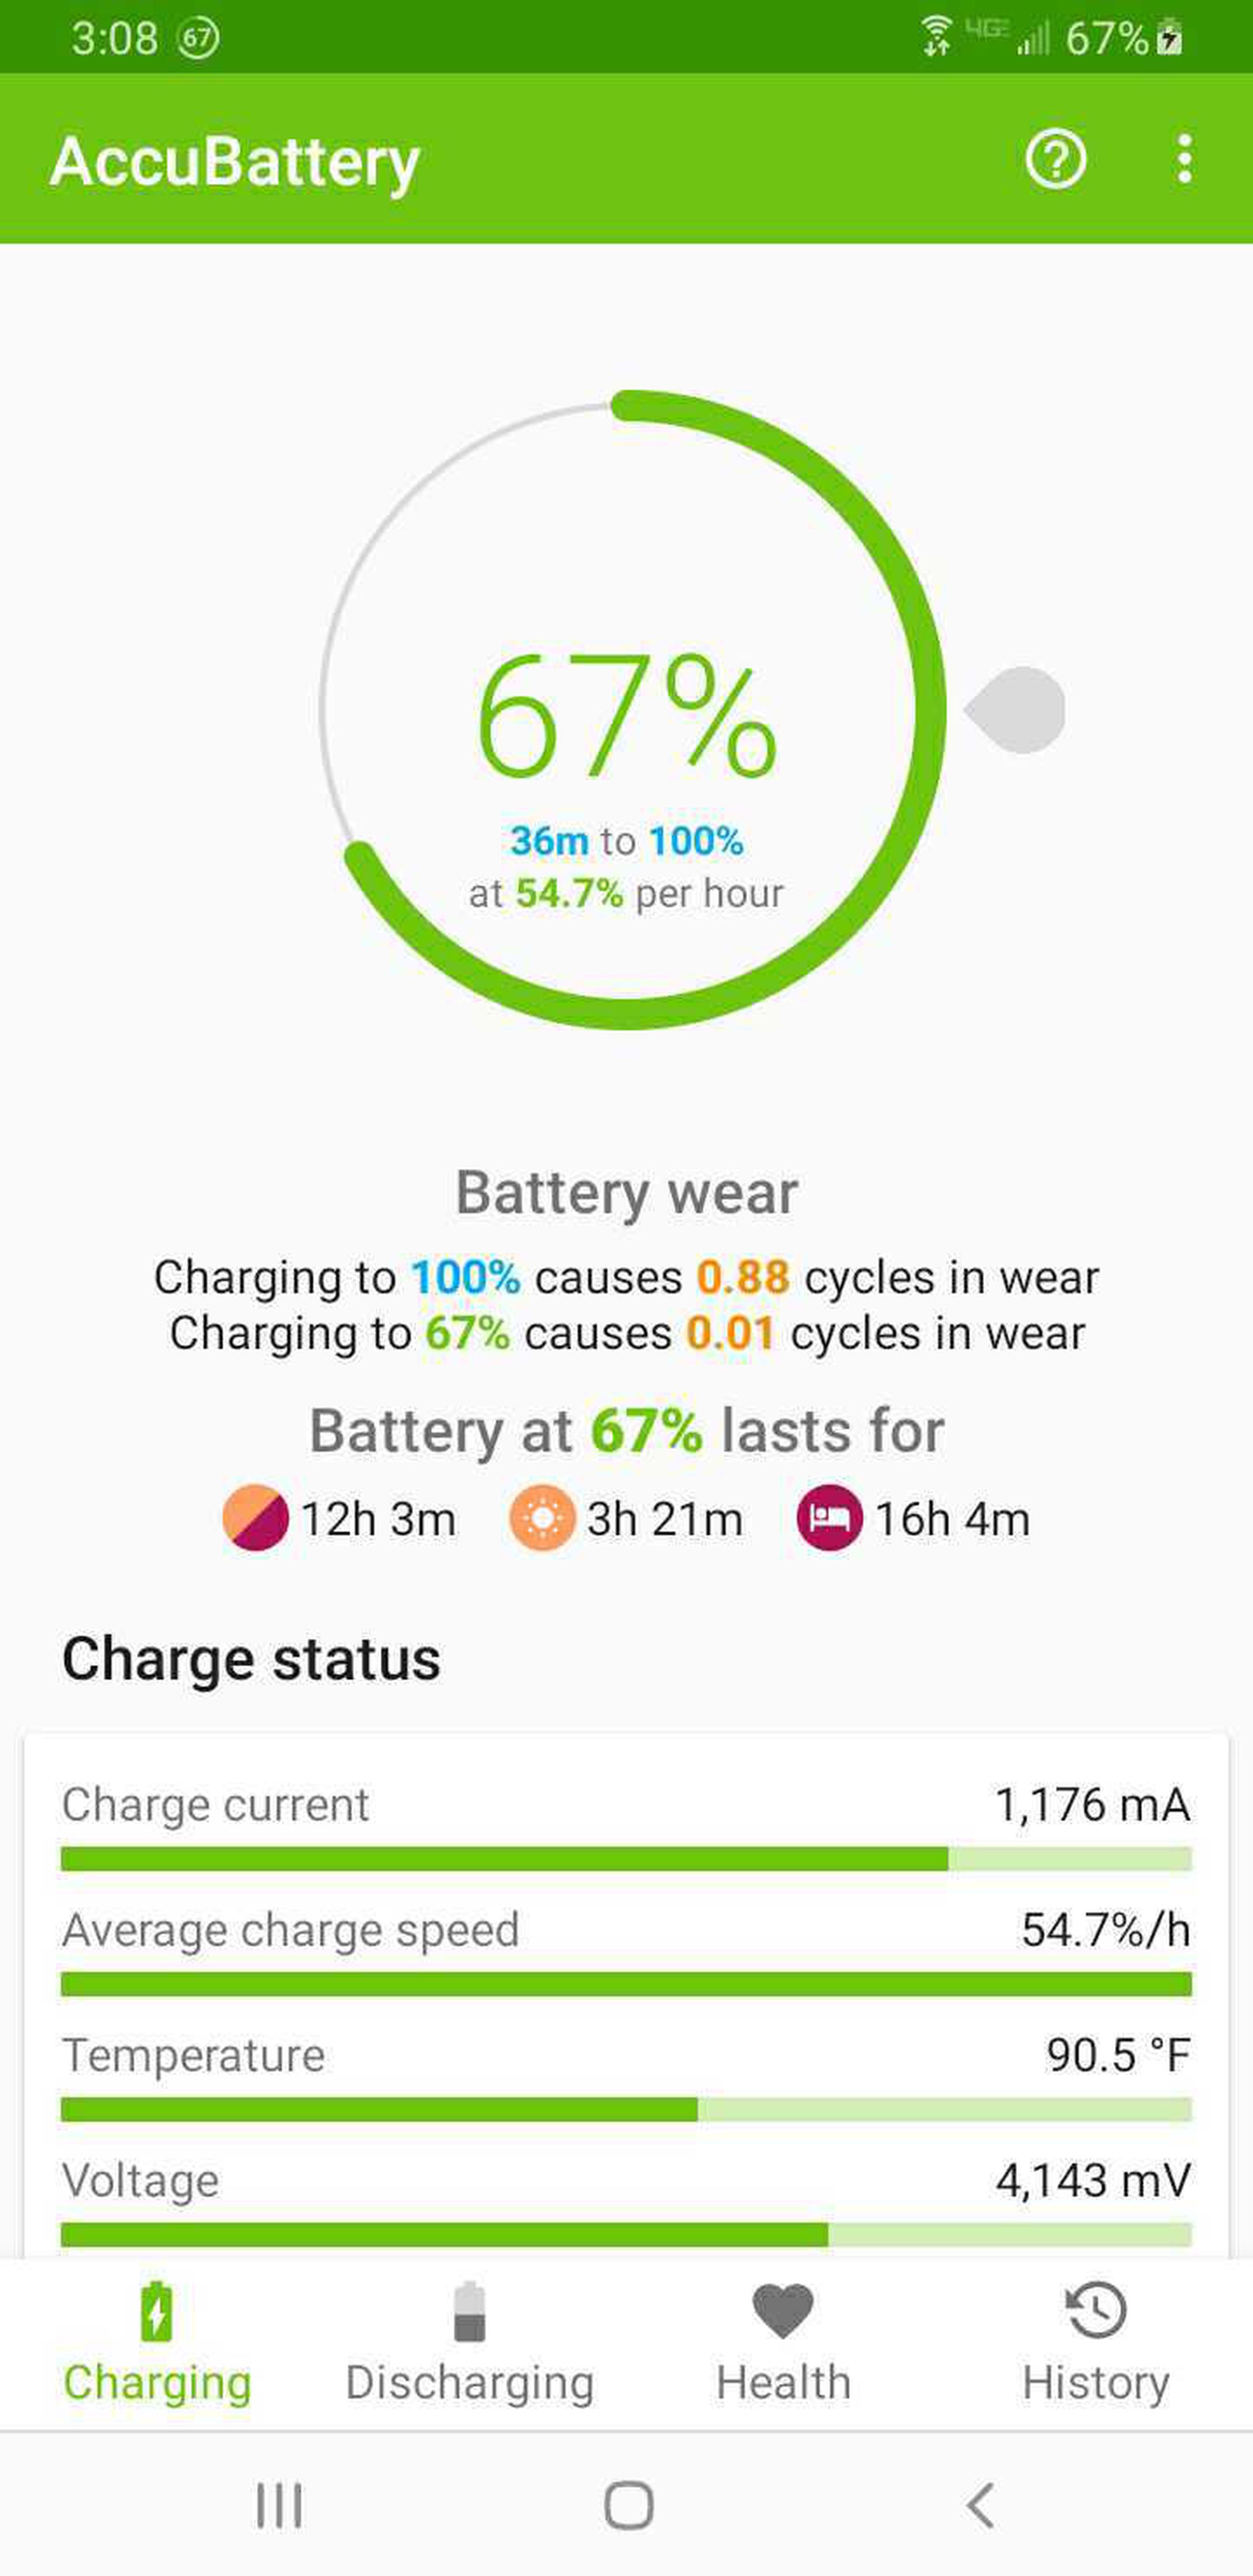 All the handy stats from AccuBattery.